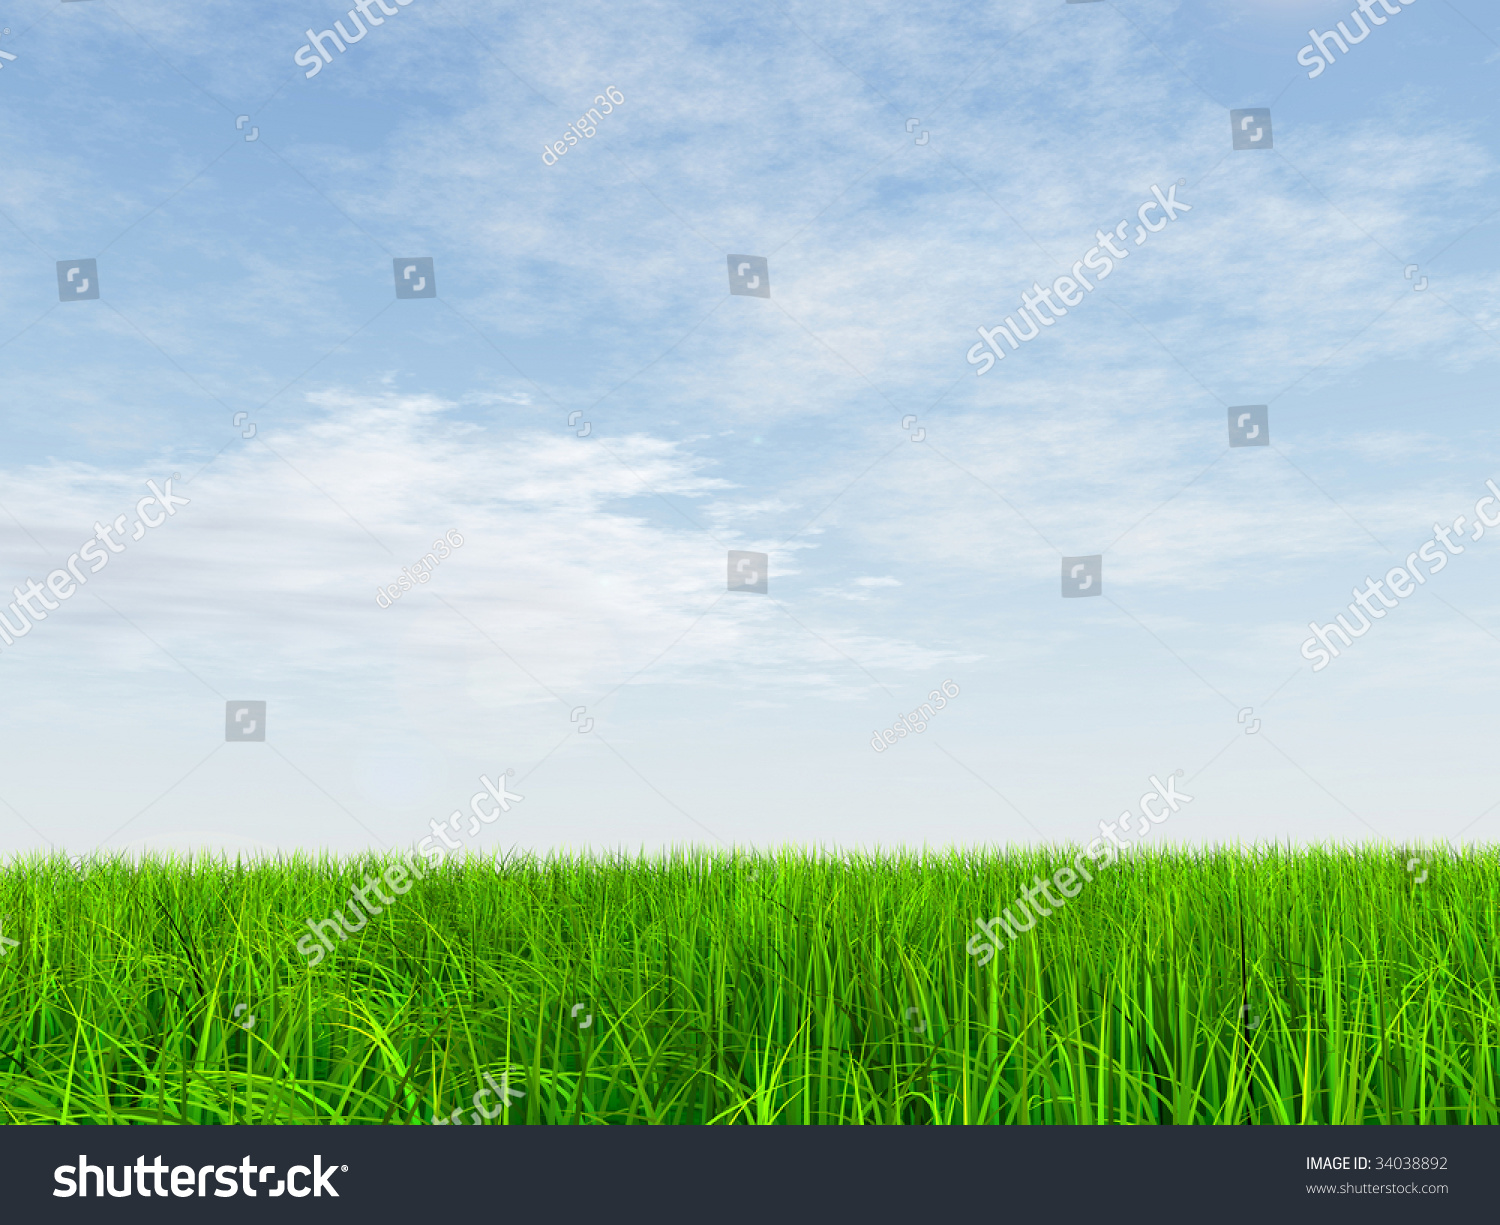 High Resolution 3d Green Grass Over A Blue Sky With White Clouds As